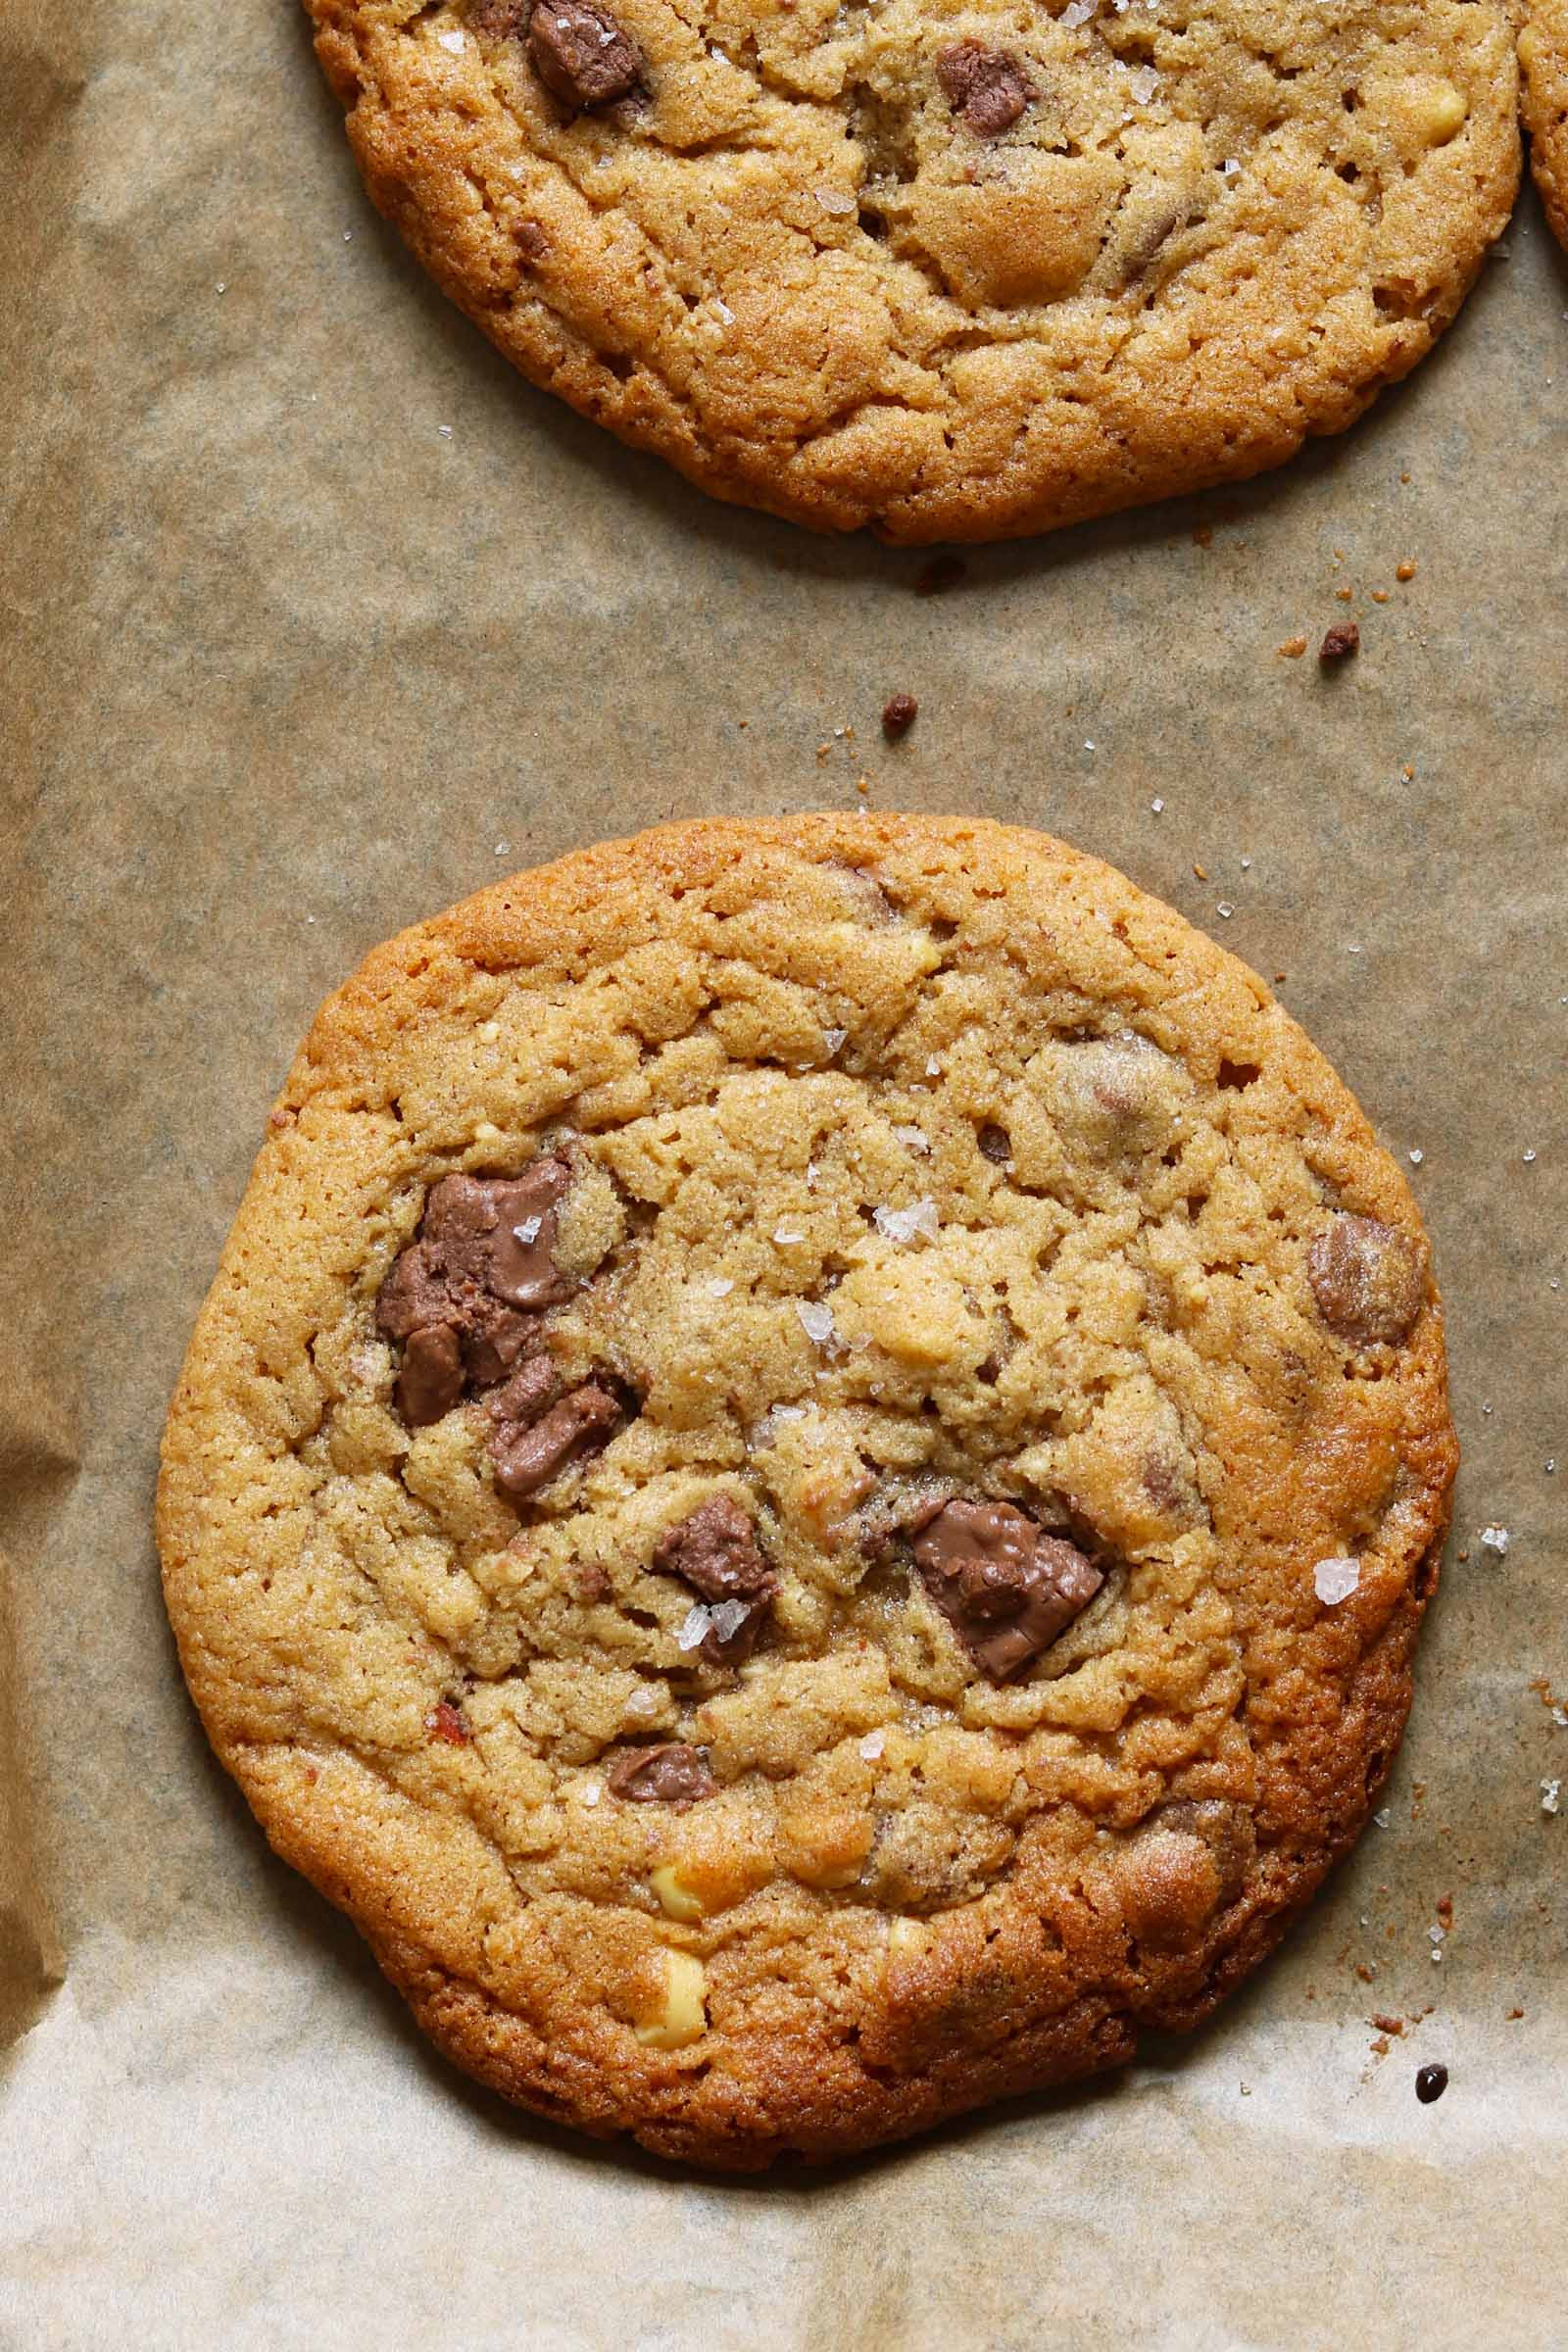 Chocolate Chip and Peanut butter Cookies Luxury Peanut butter Chocolate Chip Cookies the Last Food Blog